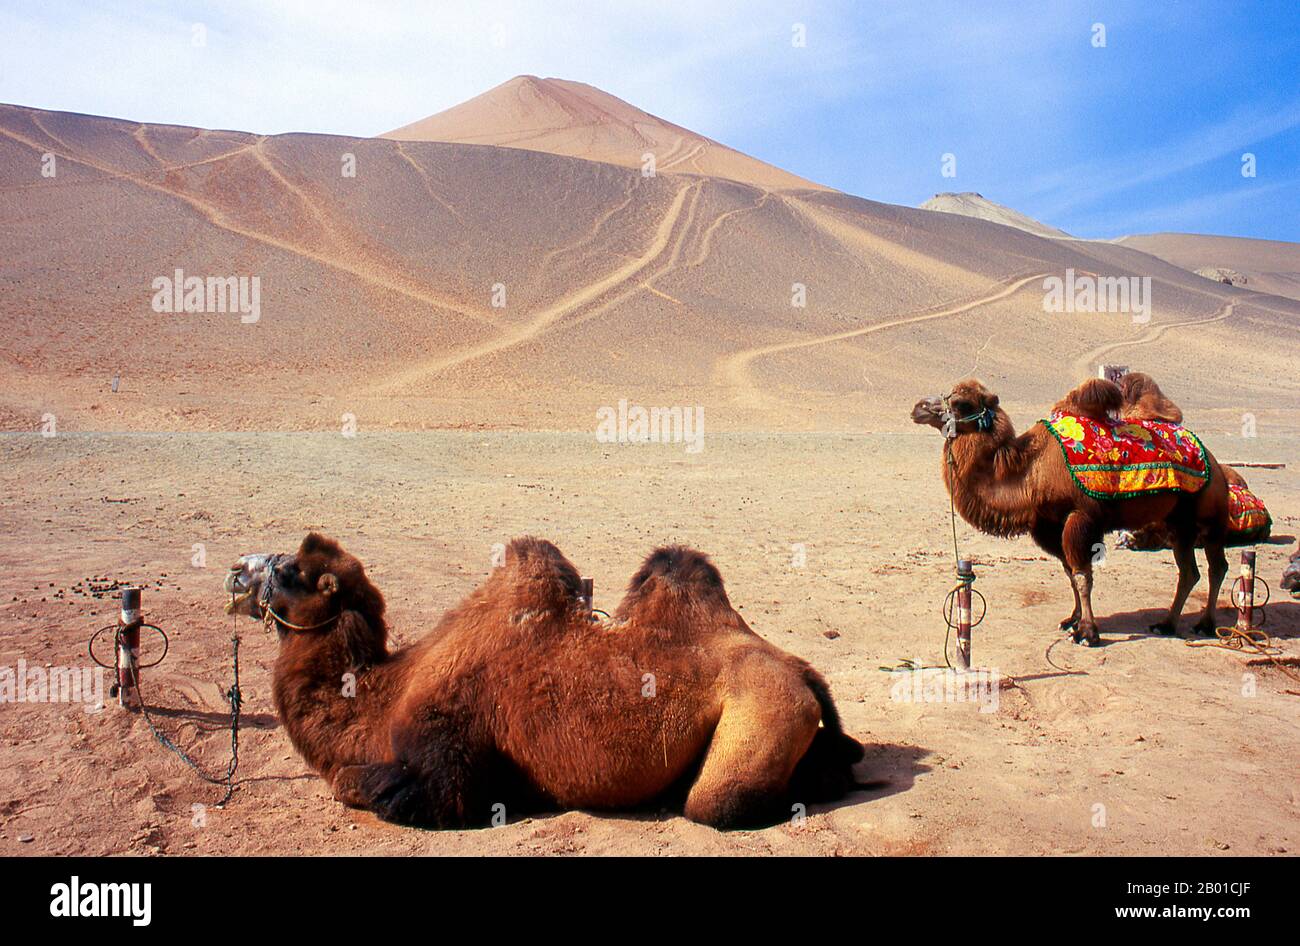 China: Camels in the desert near the Bezeklik Caves, Turpan, Xinjiang Province.  The Bactrian camel (Camelus bactrianus) is a large even-toed ungulate native to the steppes of central Asia. It is presently restricted in the wild to remote regions of the Gobi and Taklimakan Deserts of Mongolia and Xinjiang, China. The Bactrian camel has two humps on its back, in contrast to the single-humped Dromedary camel.  The Bezeklik Thousand Buddha Caves (Bozikeli Qian Fo Dong) are complex of Buddhist cave grottos dating from the 5th to the 9th centuries. There are 77 rock-cut caves at the site. Stock Photo